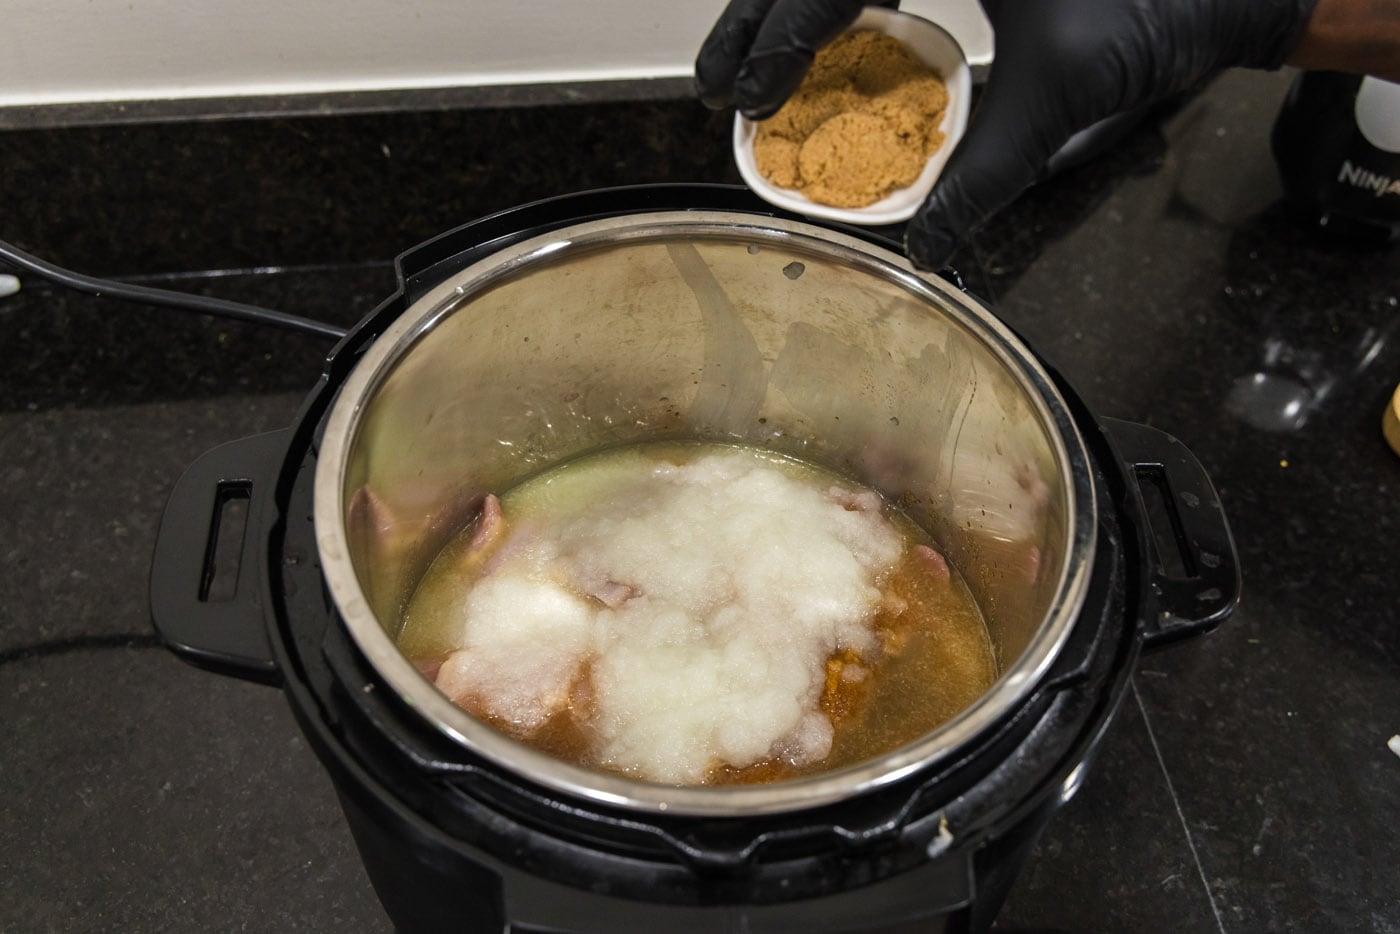 sprinkling BBQ chicken with brown sugar in instant pot